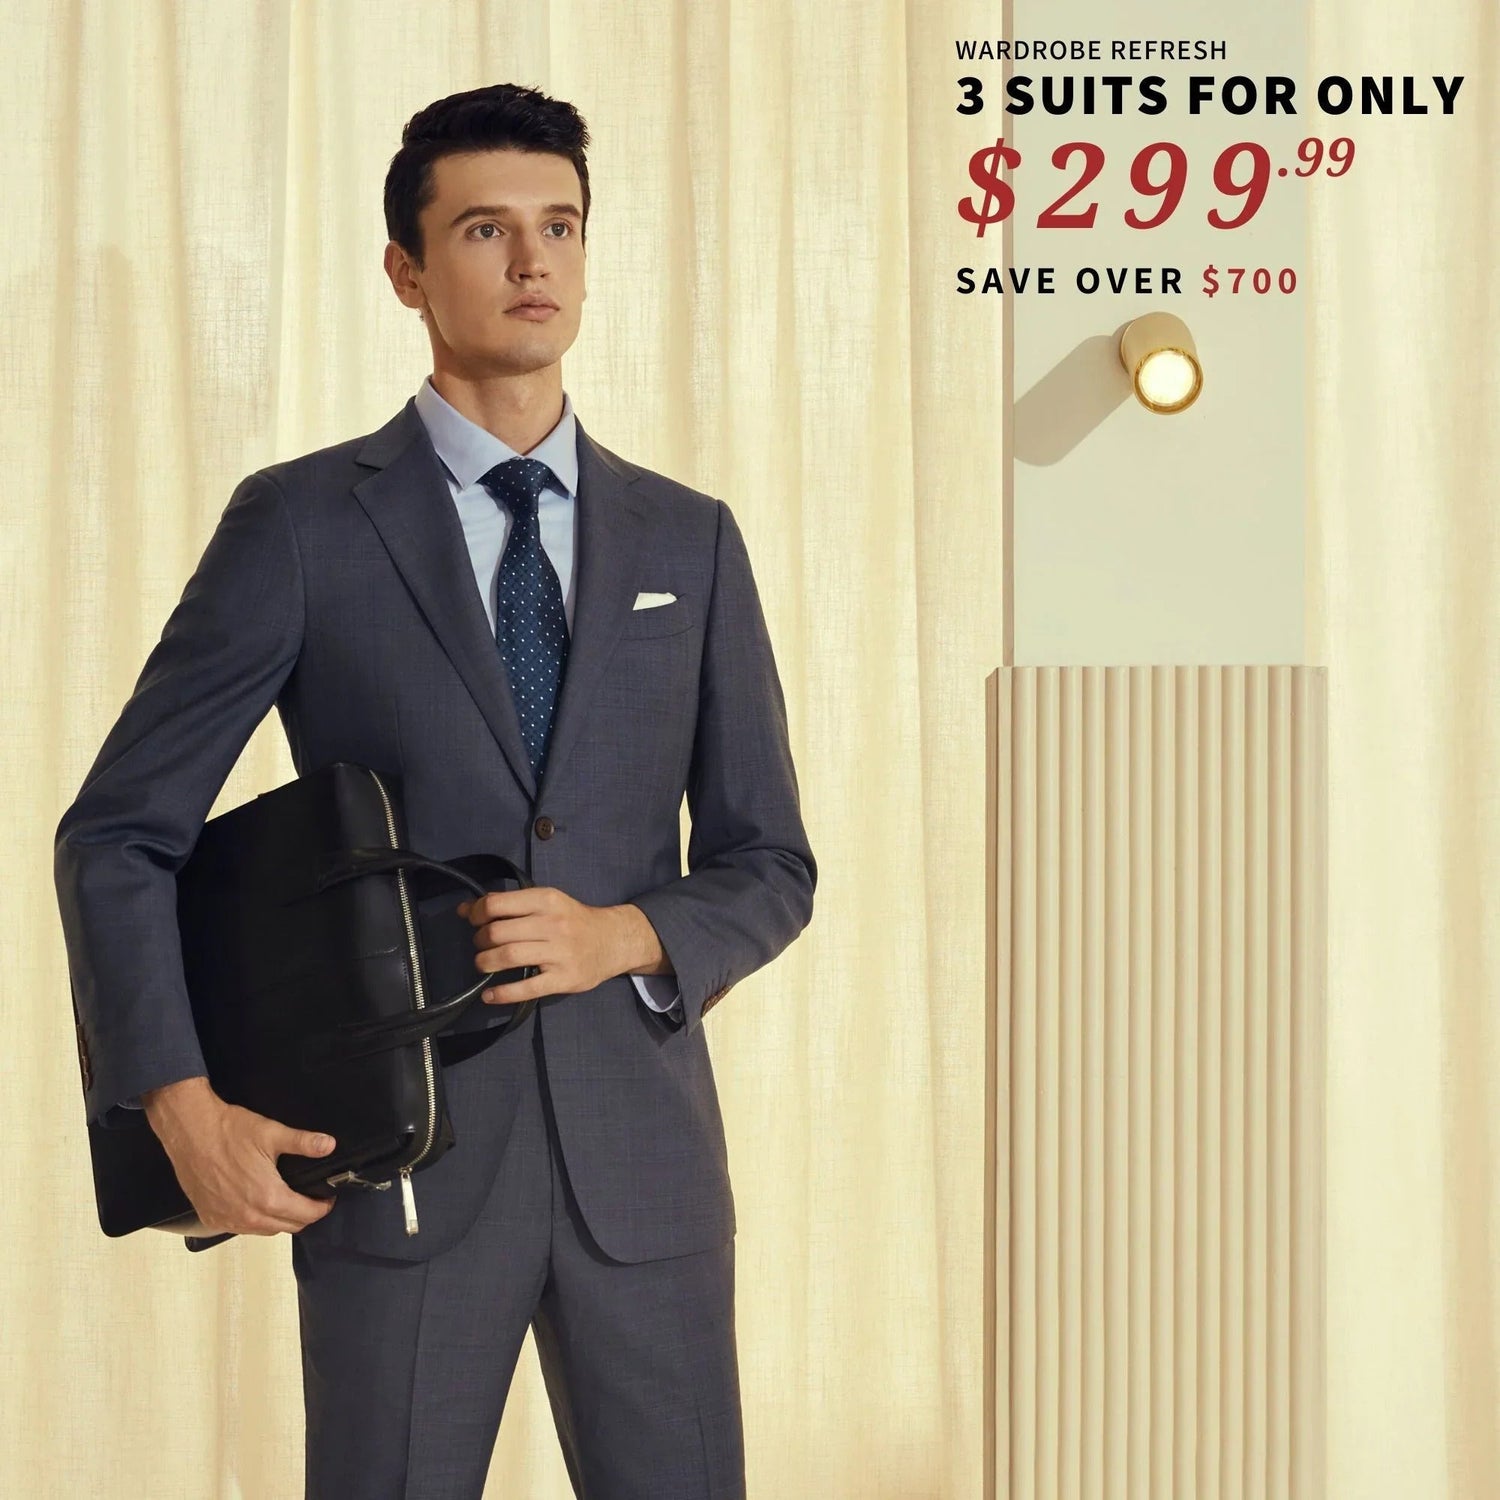 A man in a suit is holding a briefcase, while his unhemmed pants and jacket size complete his professional look with 3 Suits for $299 from the brand BYOB.